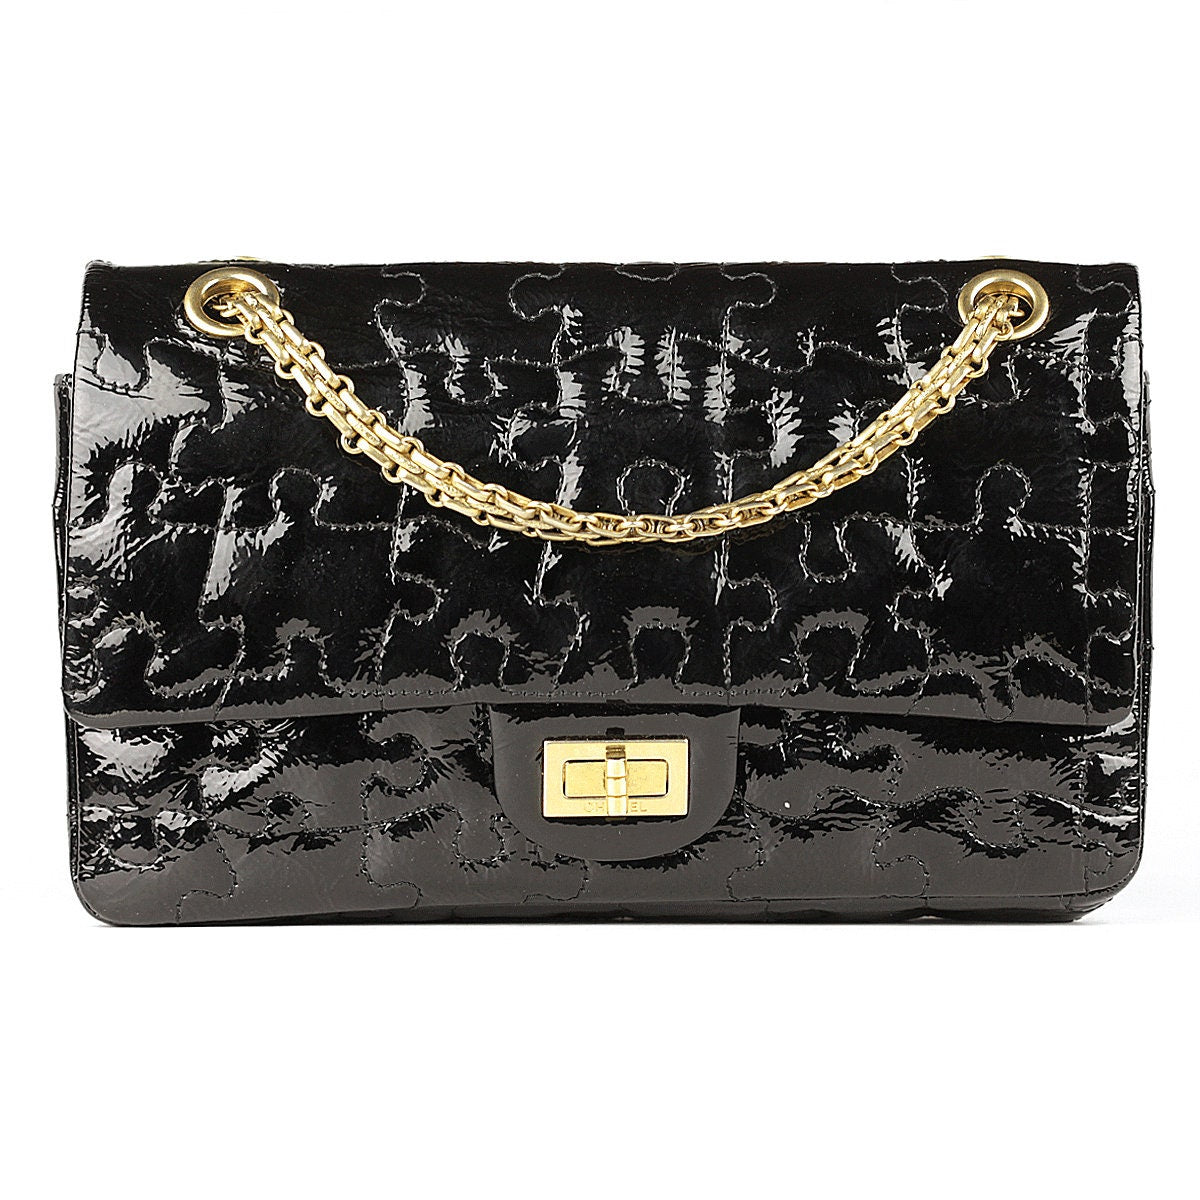 Chanel Bag 2.55 Reissue Black Patent Leather Puzzle Pieces with